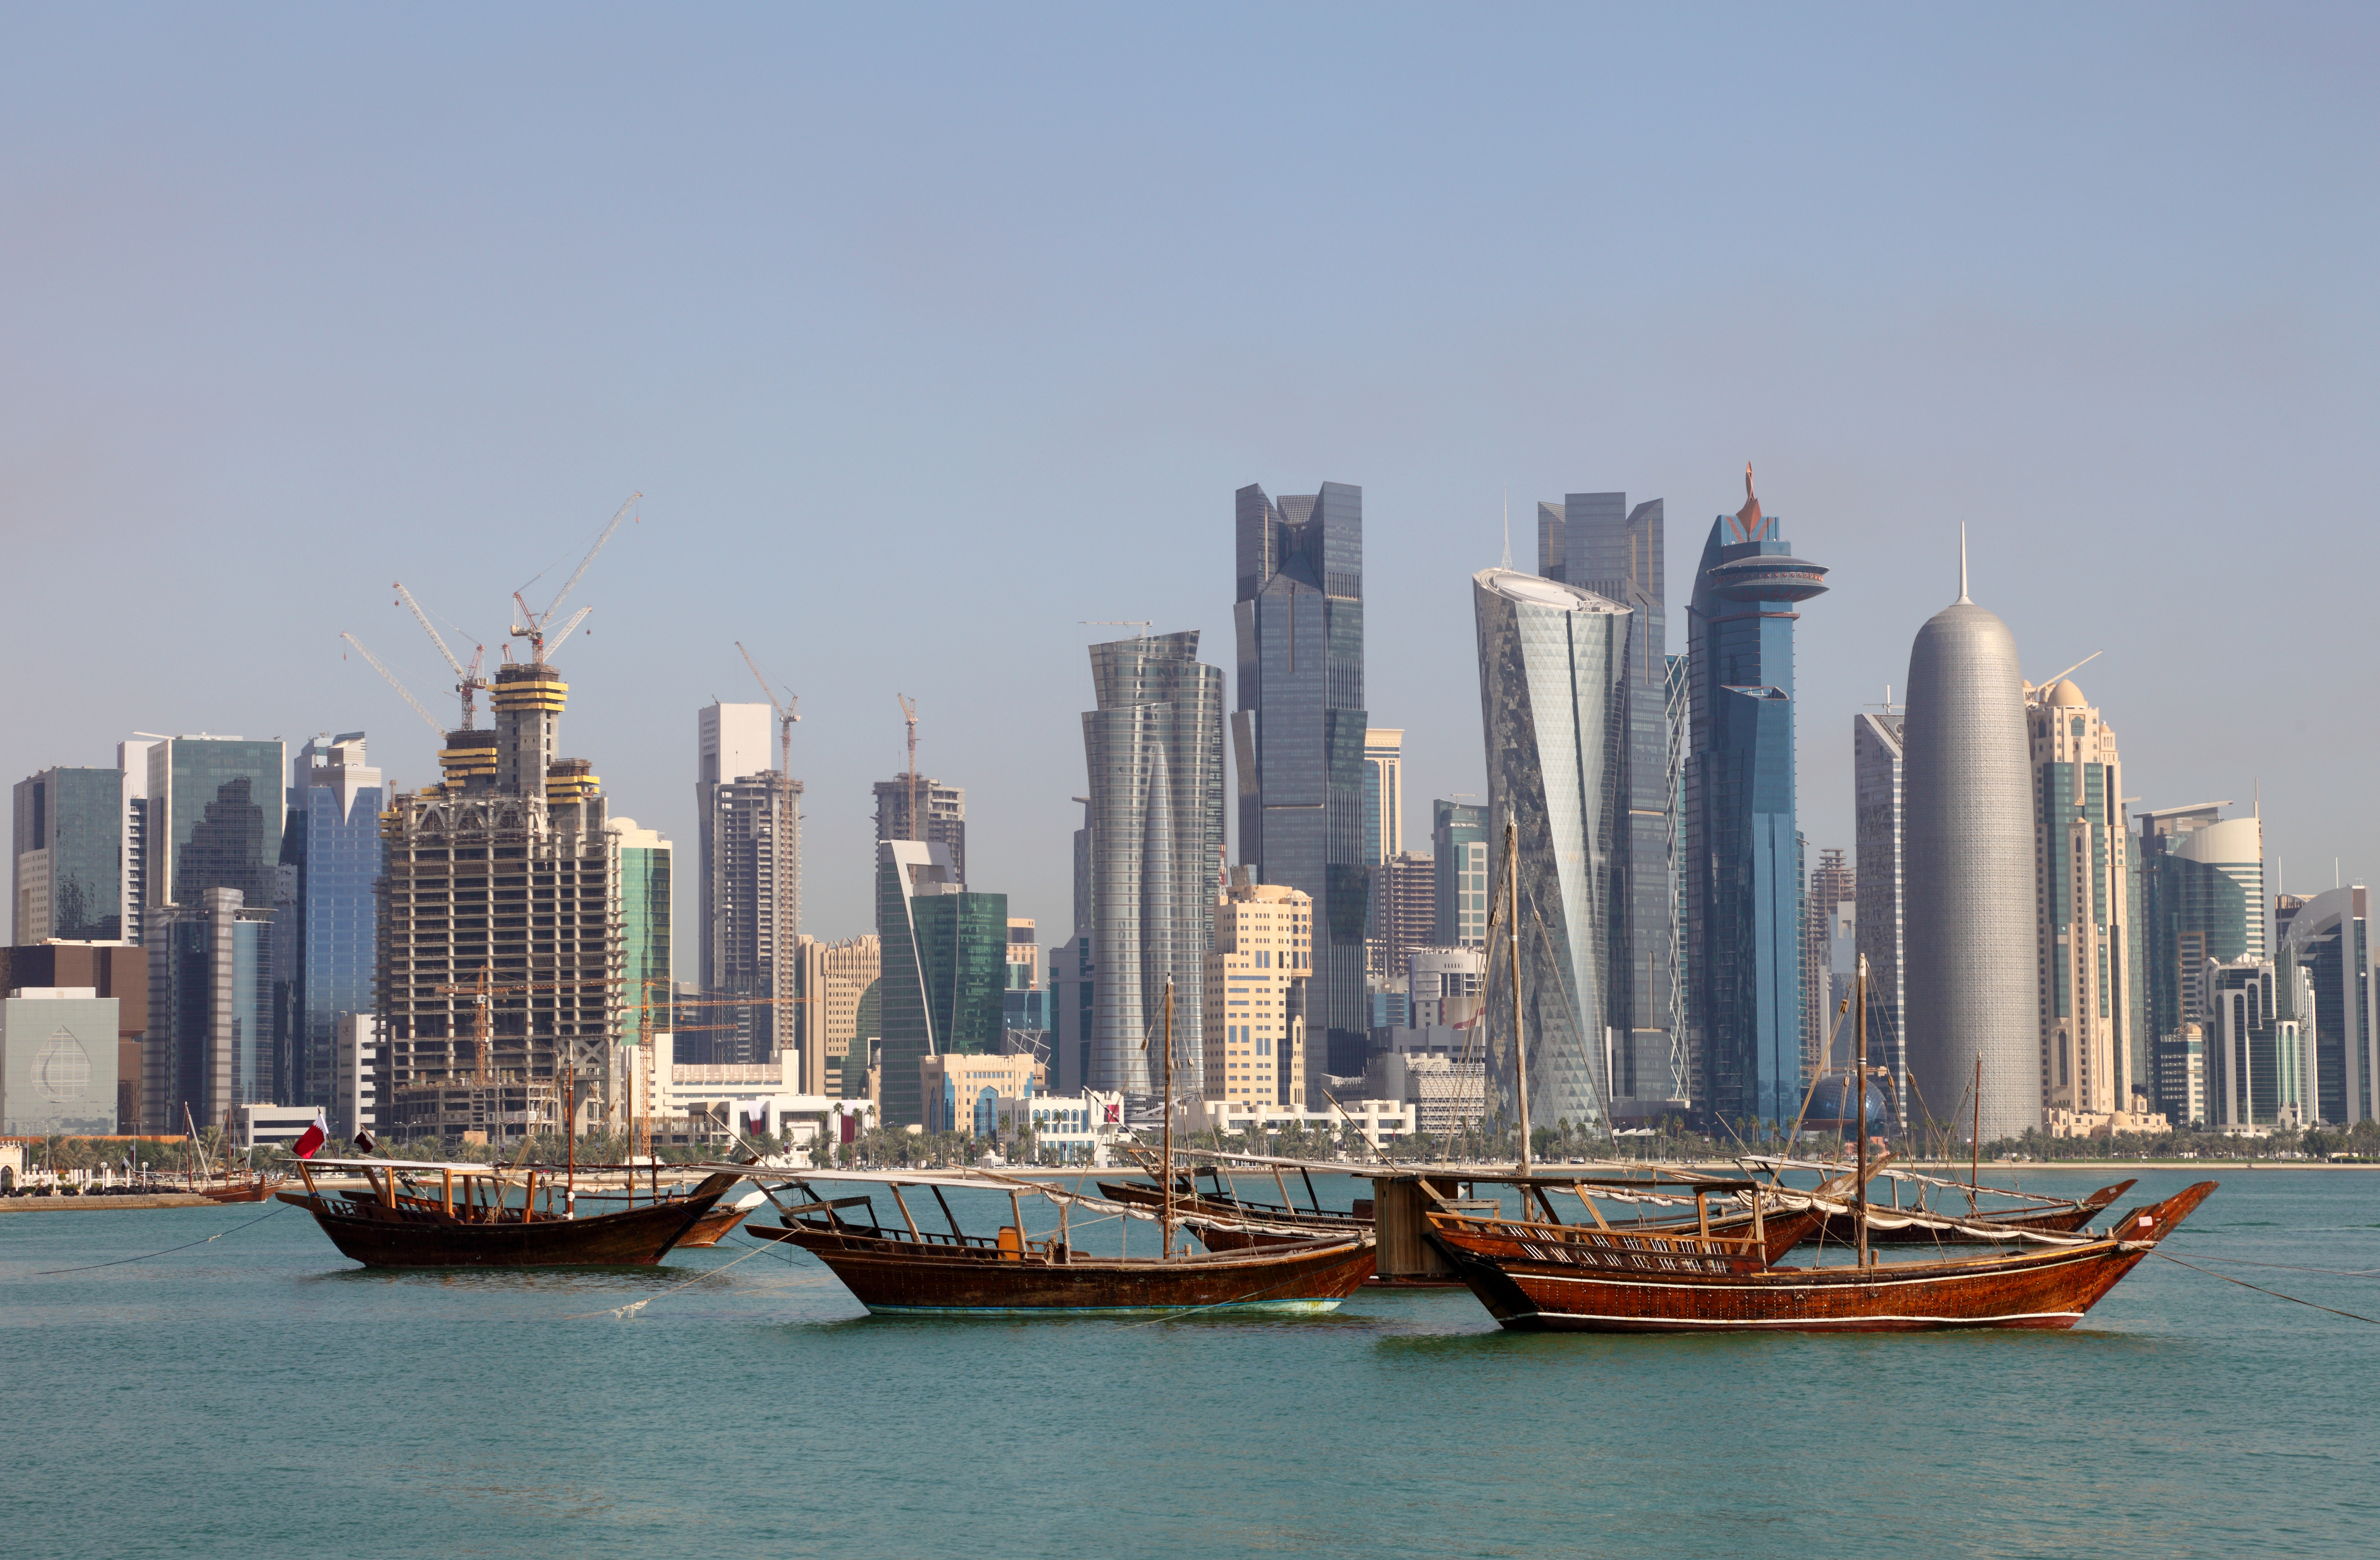 Skyline of Doha with traditional arabic dhows. Qatar, Middle East. Source: philipus/Fotolia